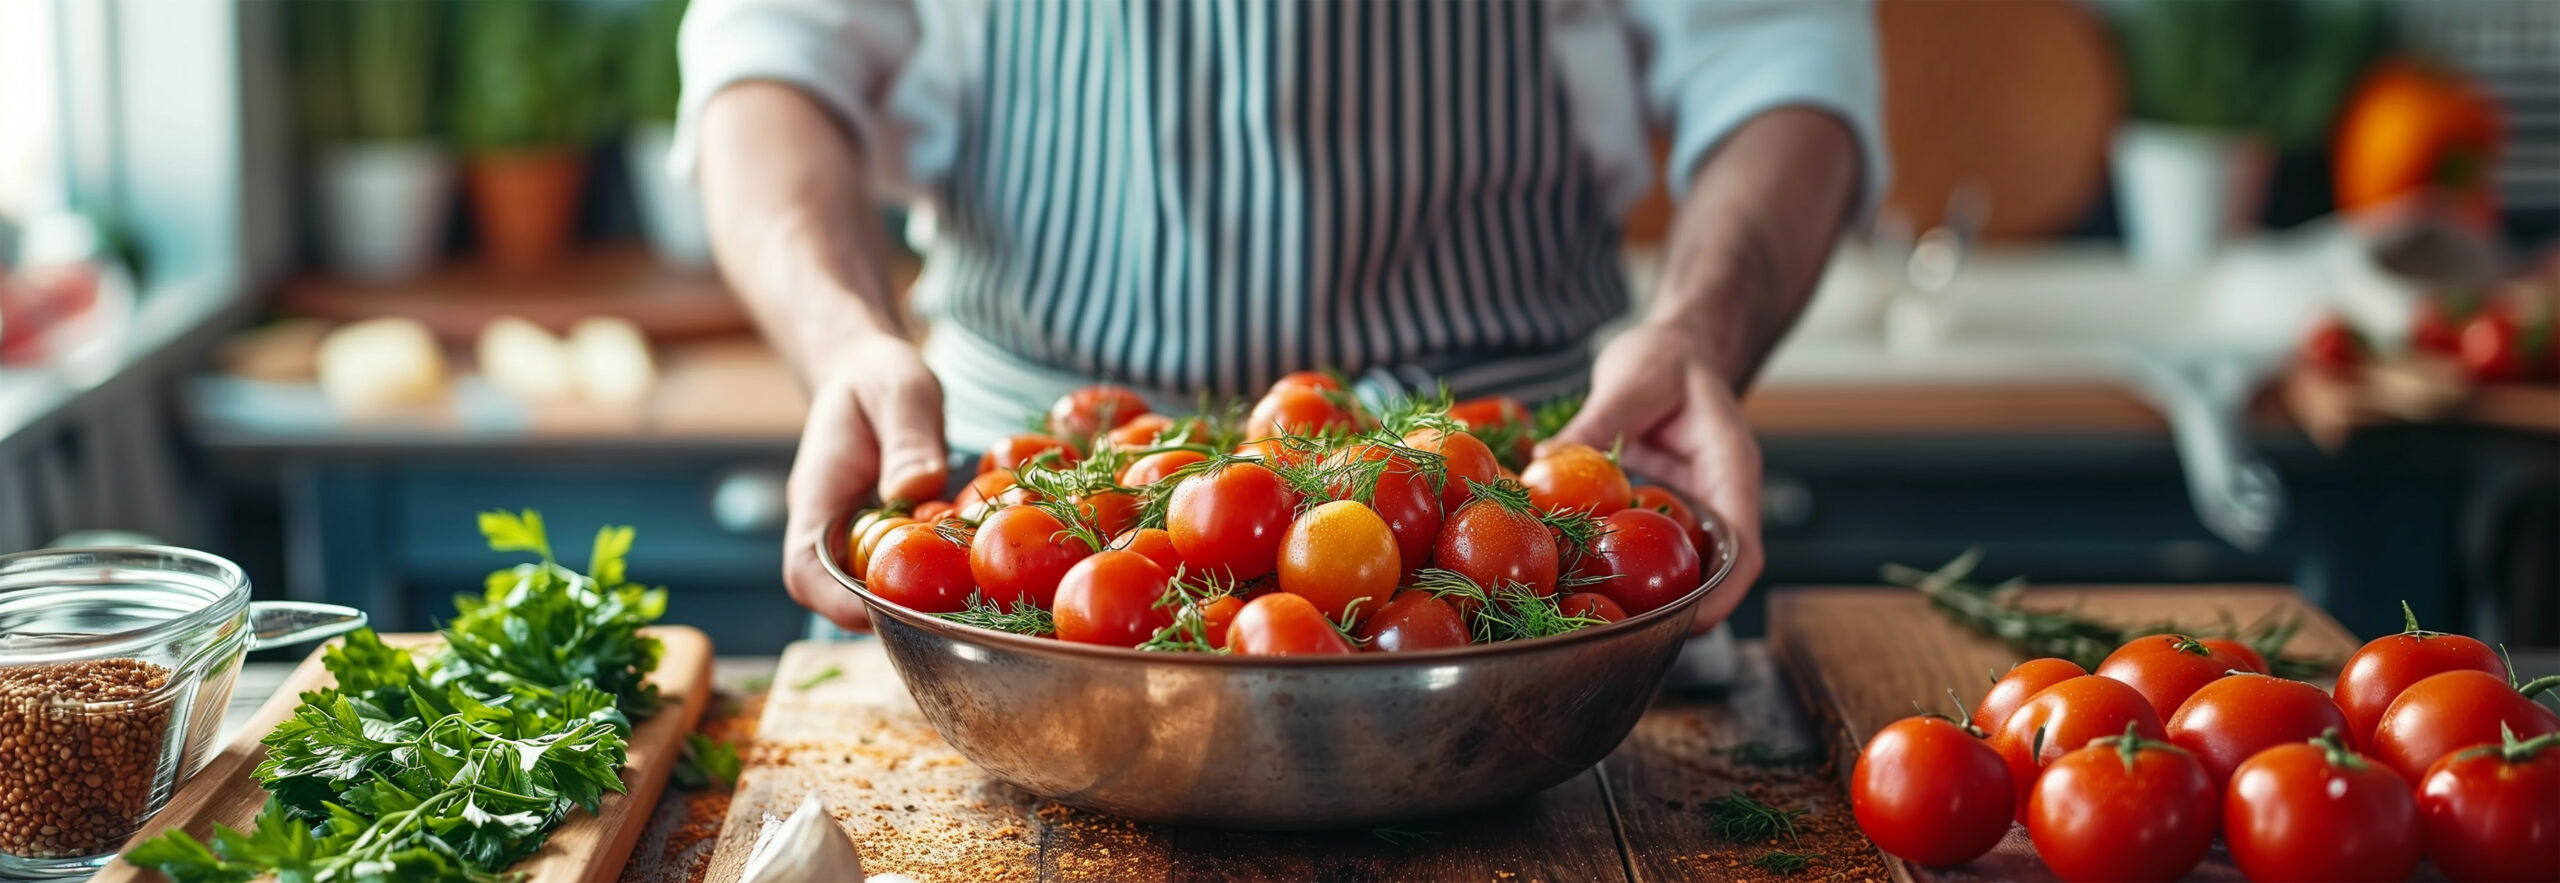 Panoramic banner of hands preparing fresh vegetables on table. Healthy vegetarian cooking concept with tomatoes, herbs and seasonings. Indoor kitchen scene with copy space for advertising.